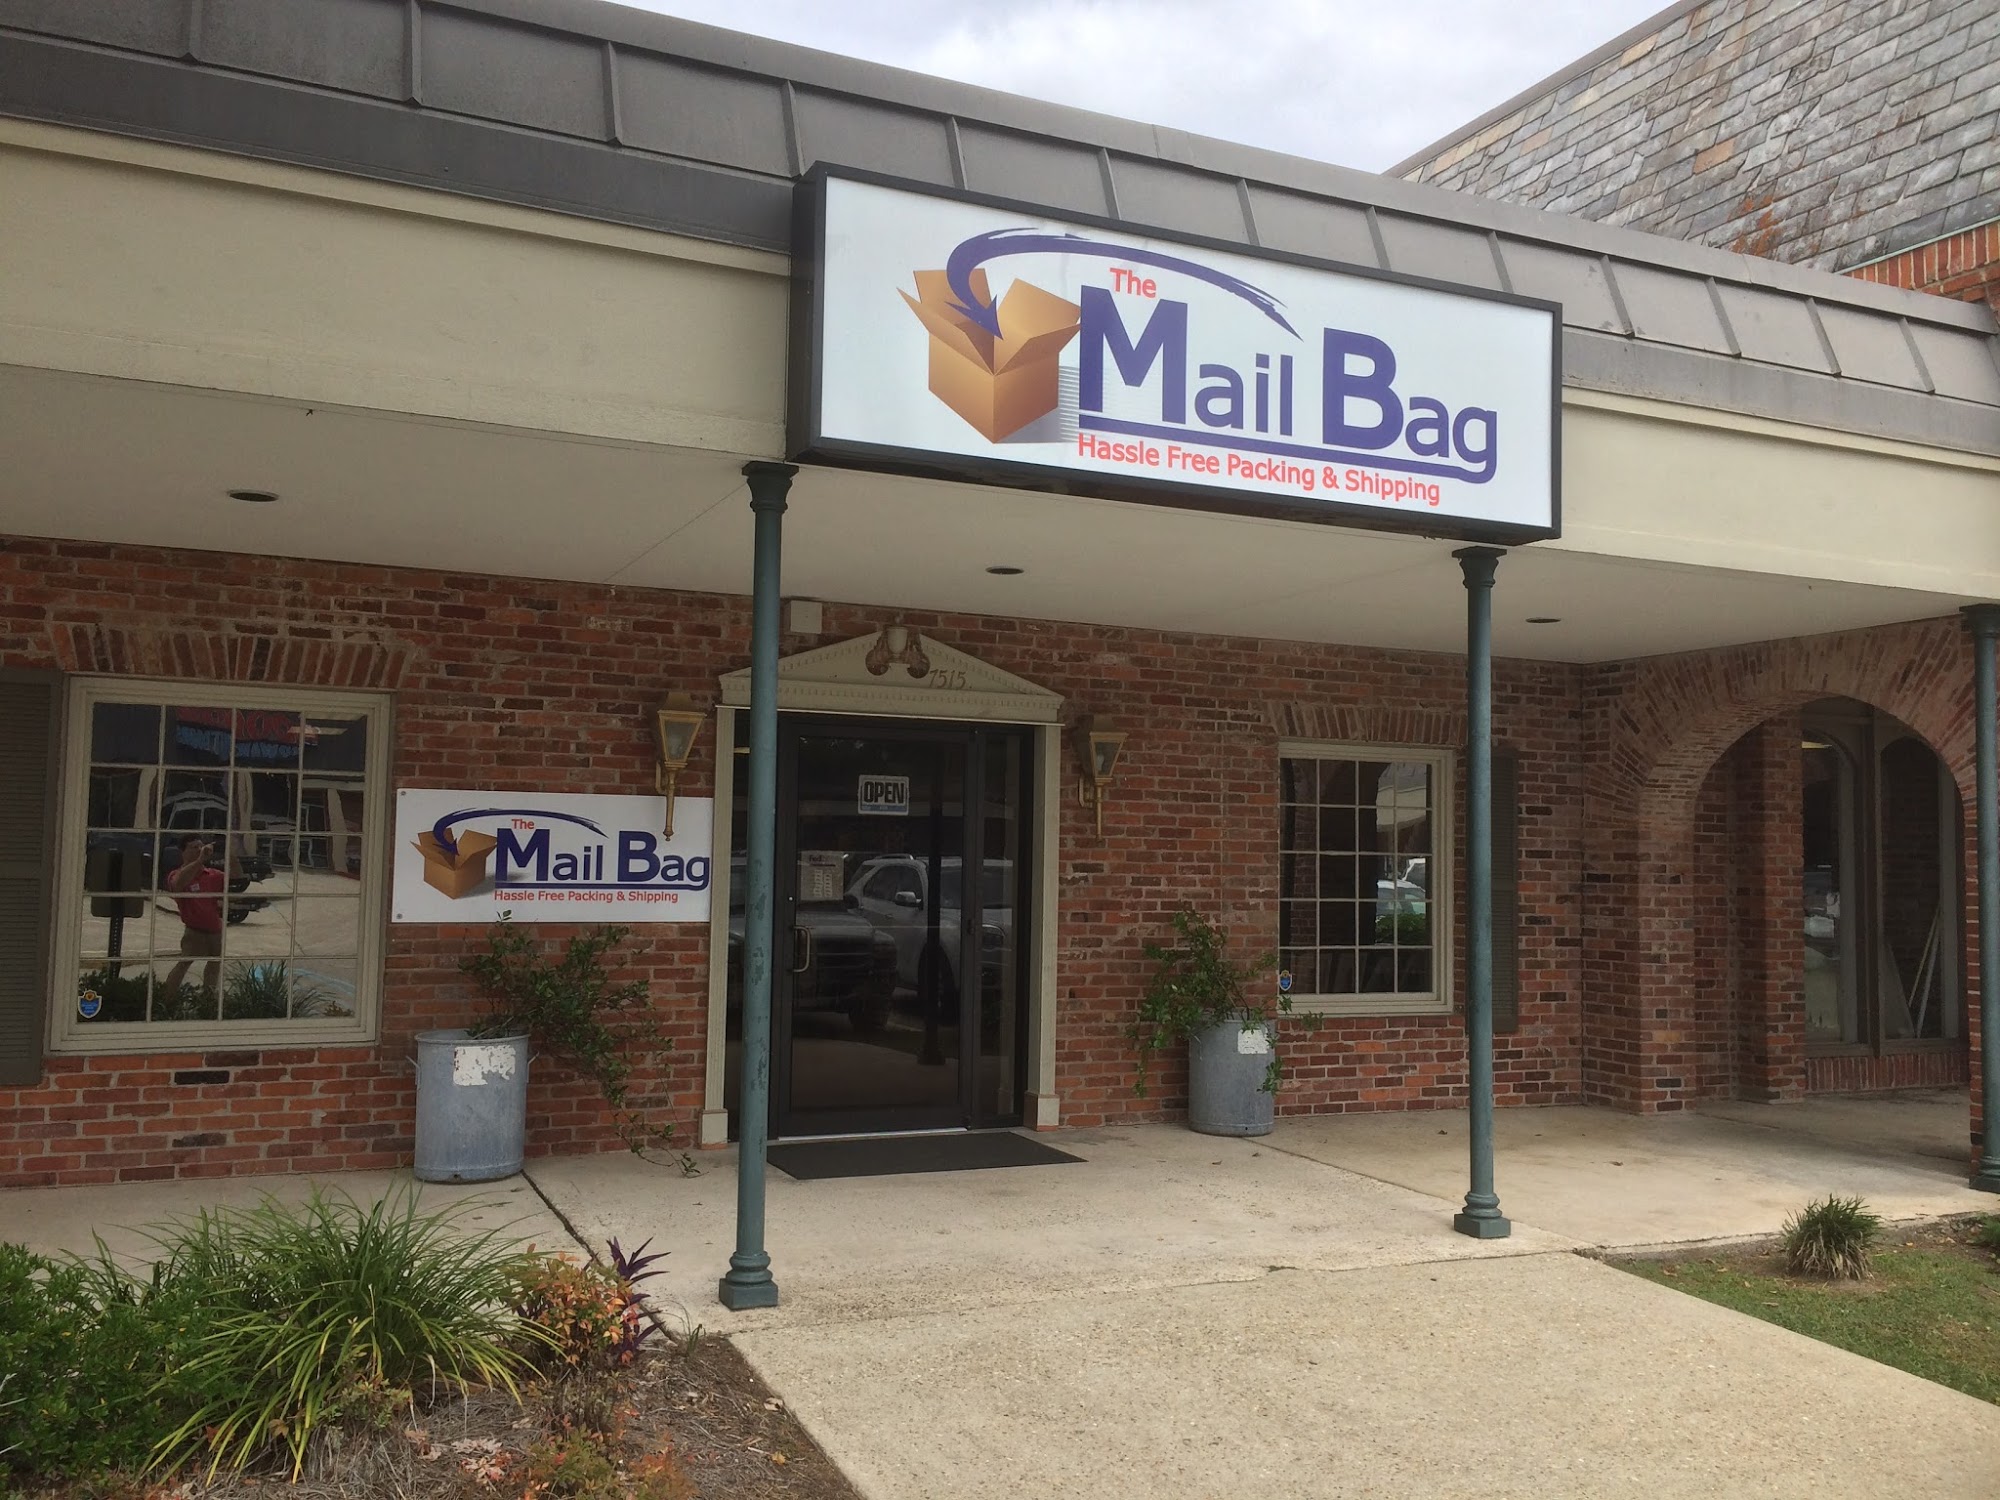 The Mail Bag